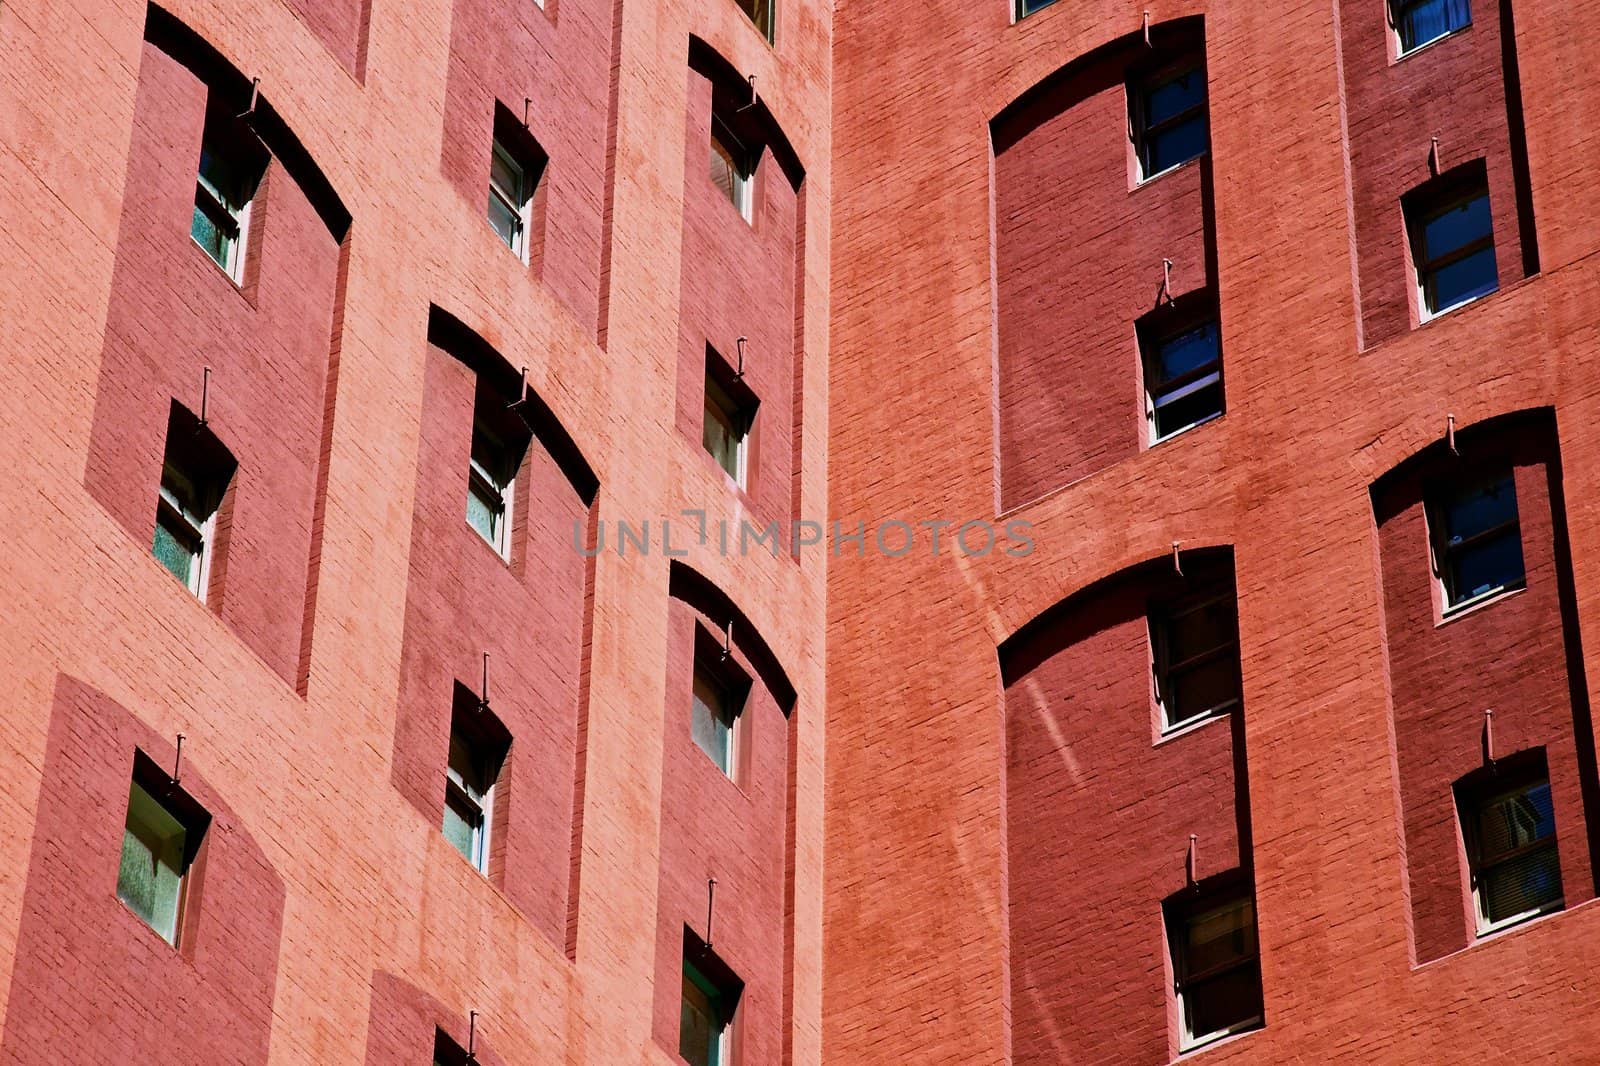 Office Buildings in the City red Brick at an Angle